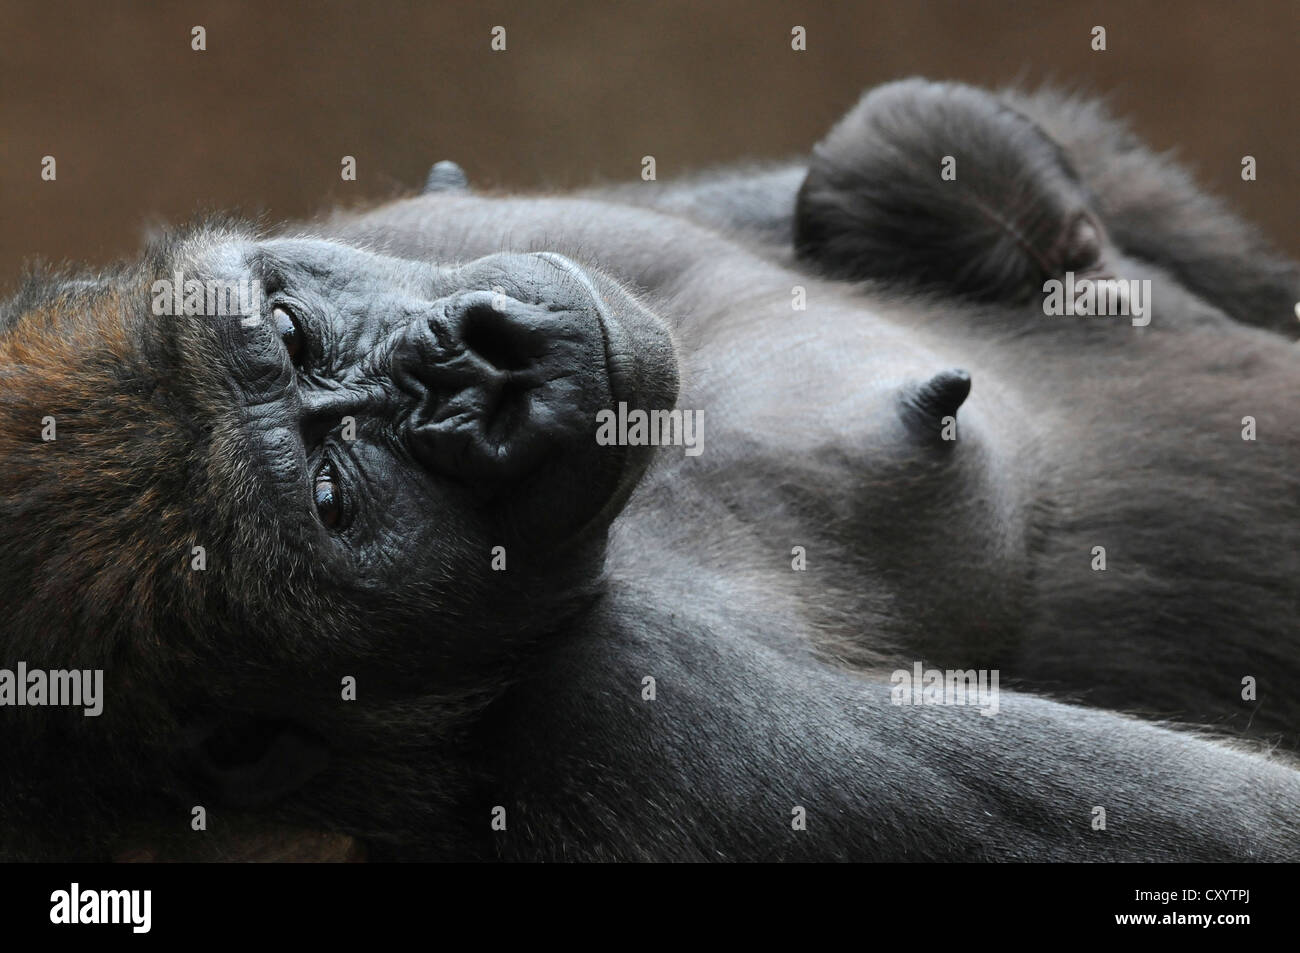 Western Lowland Gorilla (Gorilla gorilla gorilla), mother and baby resting, captive, African species, zoo animals, Lower Saxony Stock Photo